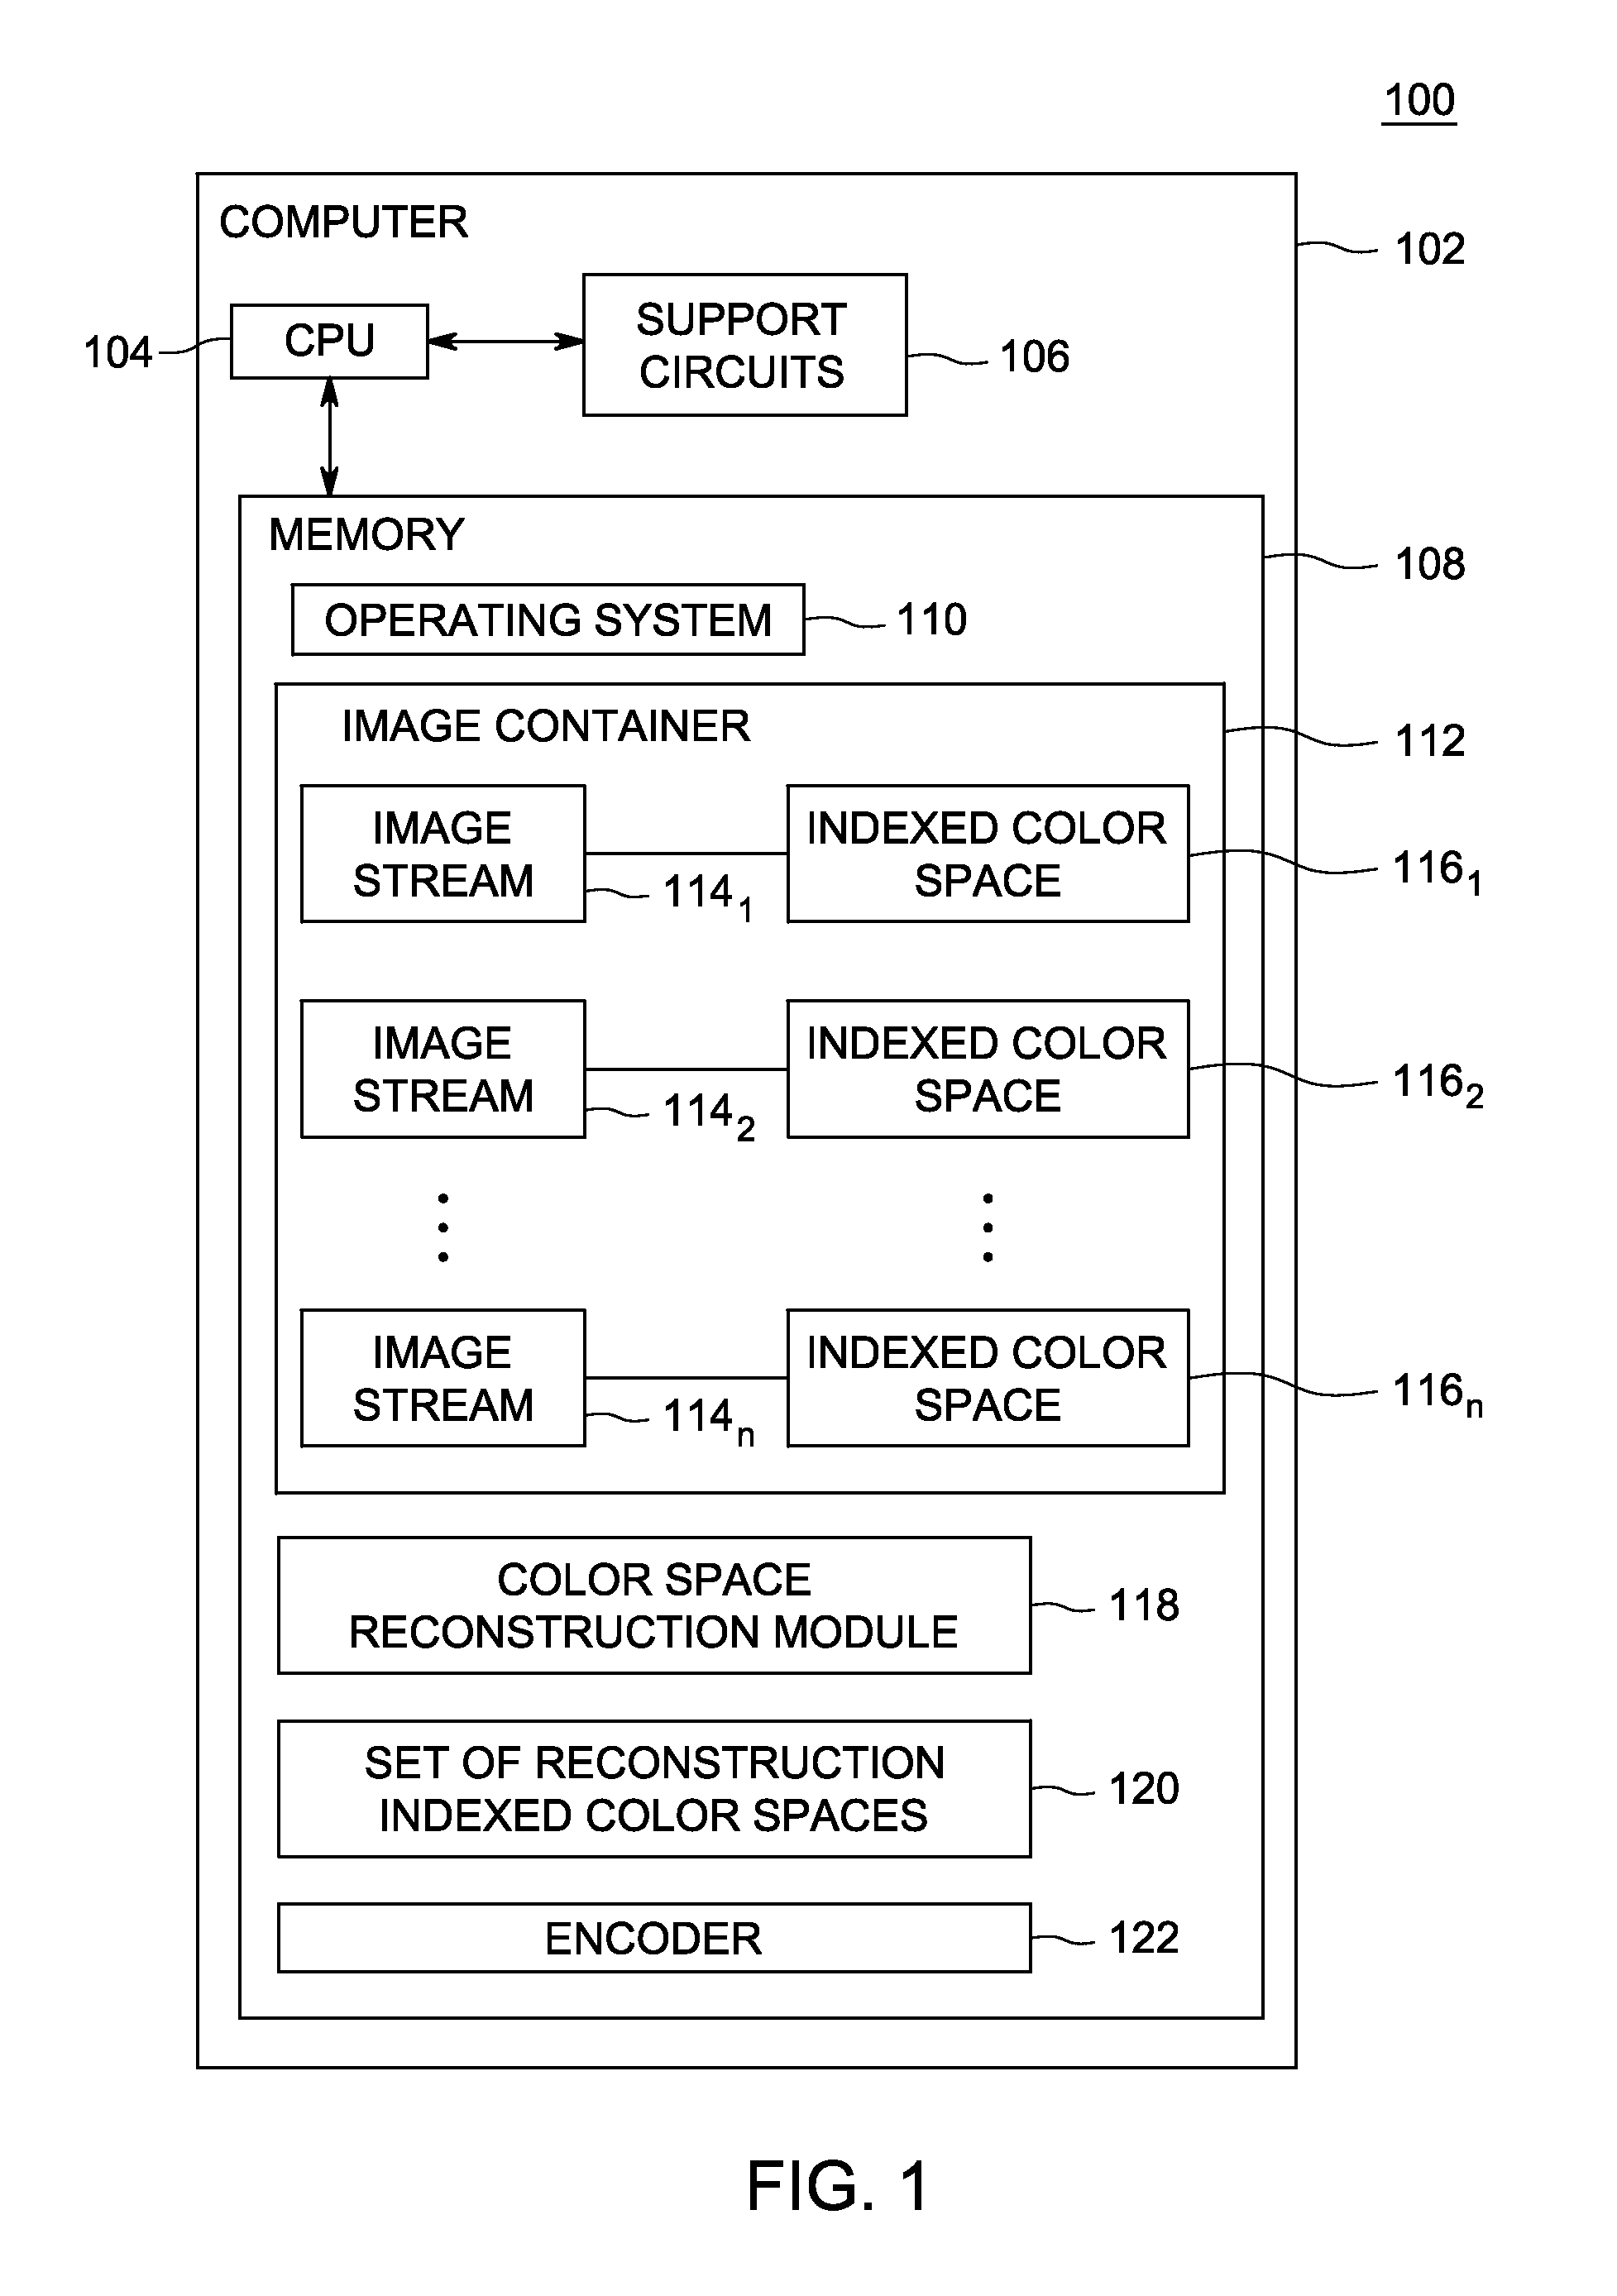 Method and apparatus for reconstructing indexed color spaces